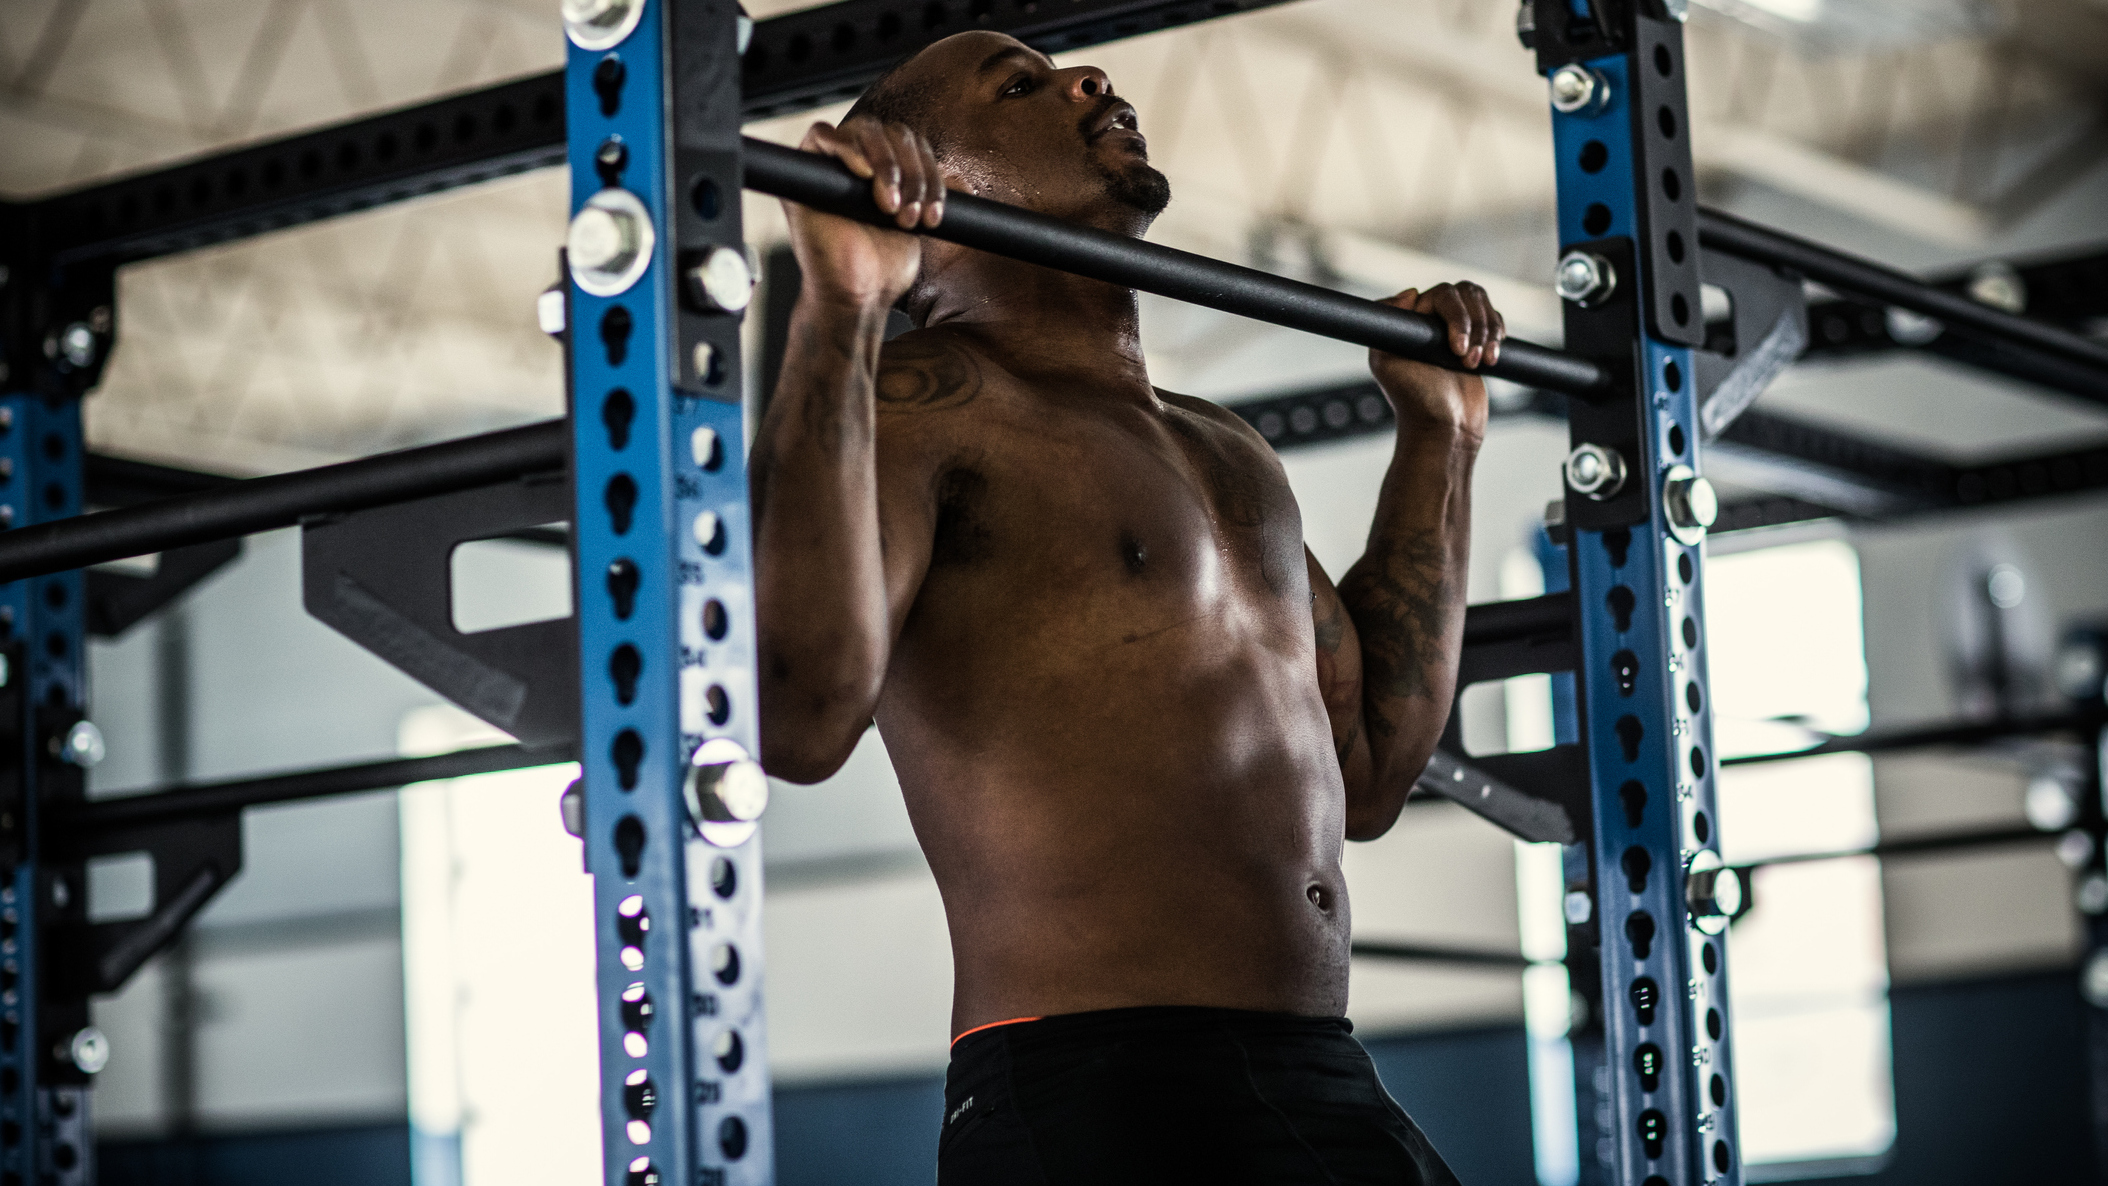 The Key To Doing A Perfect Pull-Up Is To NOT Think About Pulling Yourself Up, According To This Expert Trainer